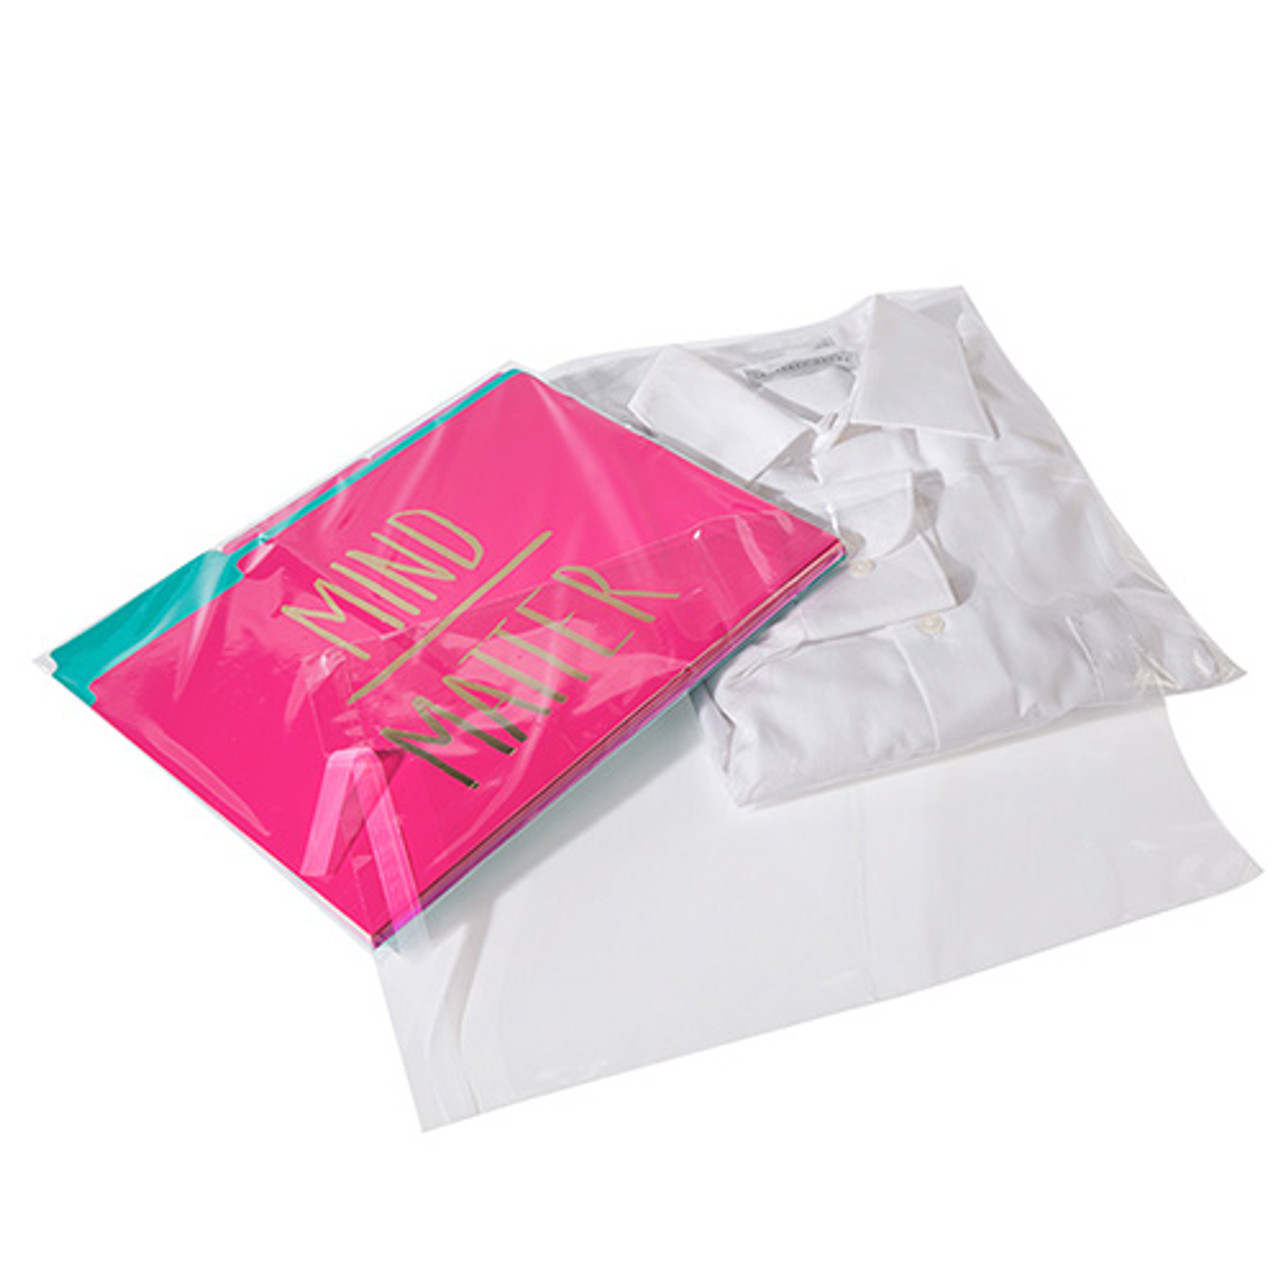 Heavy Duty Lip & Tape Self Sealing Bags - 1.6 Mil 500/ $30 ($40 including  shipping)